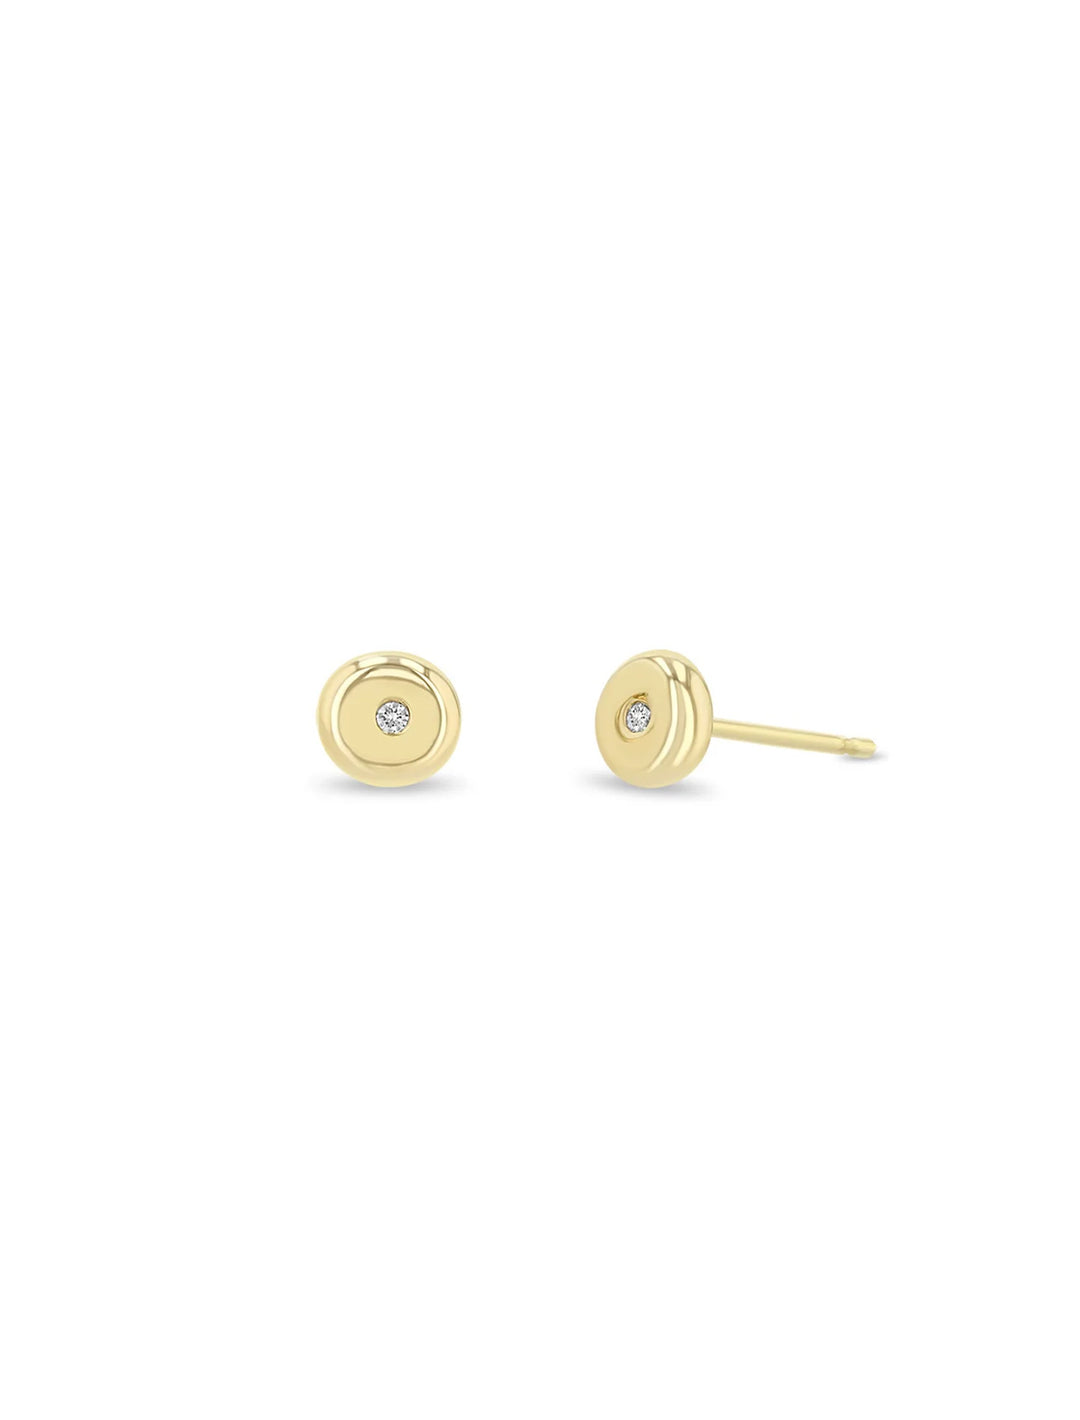 Zoe Chicco's diamond and gold small nugget studs.